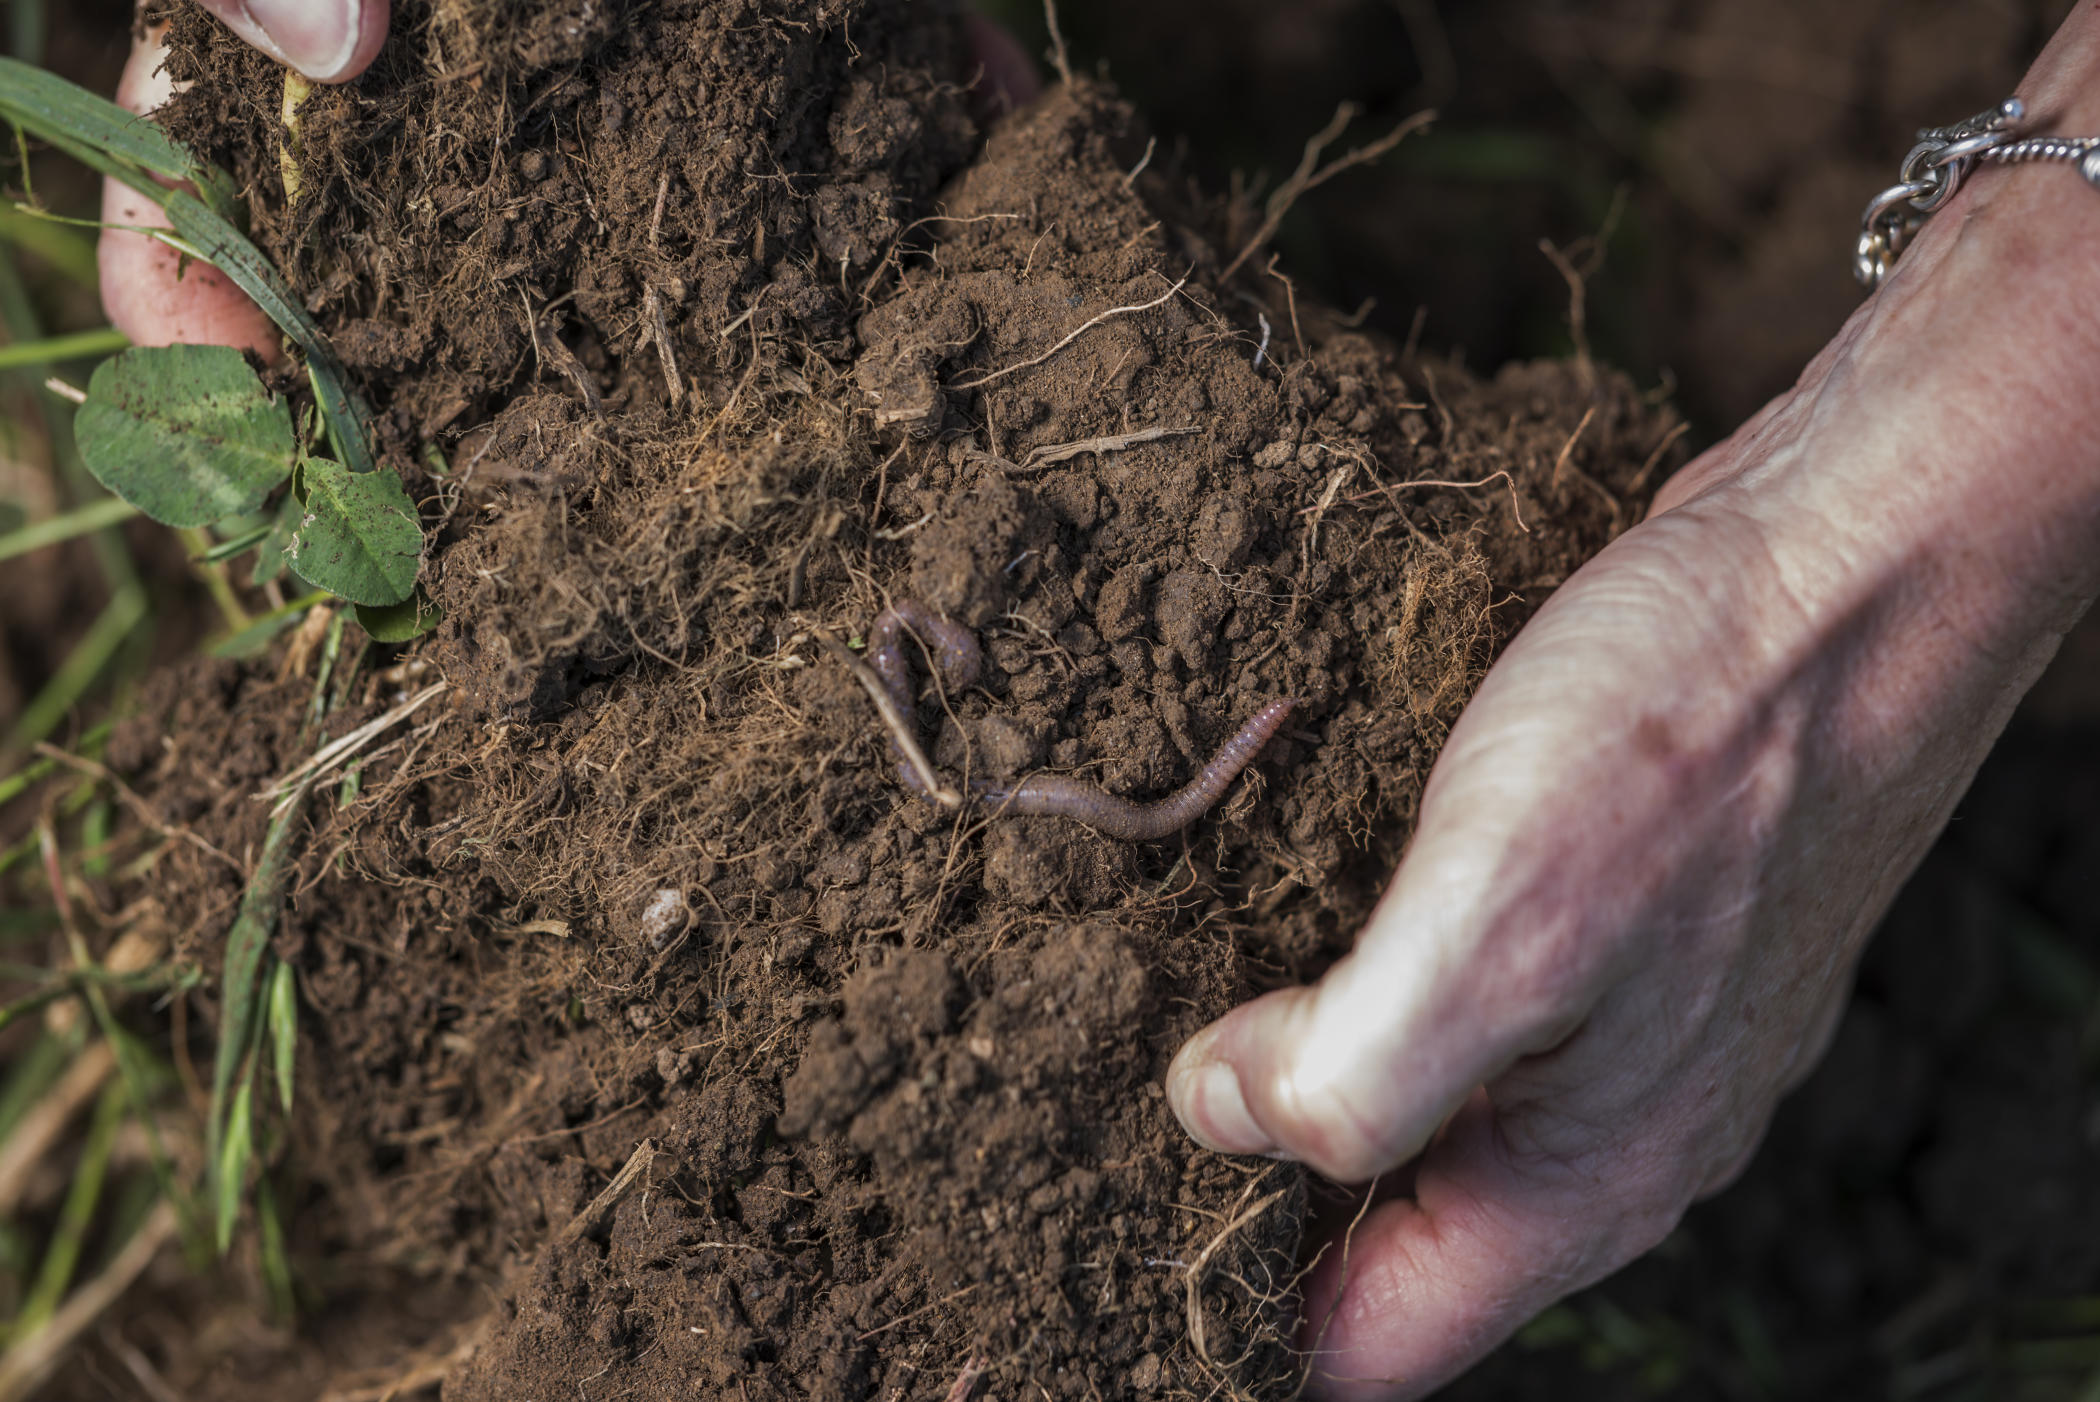 A worm in the handful of soil in the grazing pasture at the University Farm is part of the regenerative soil program that makes efforts for sustainability farming possible.